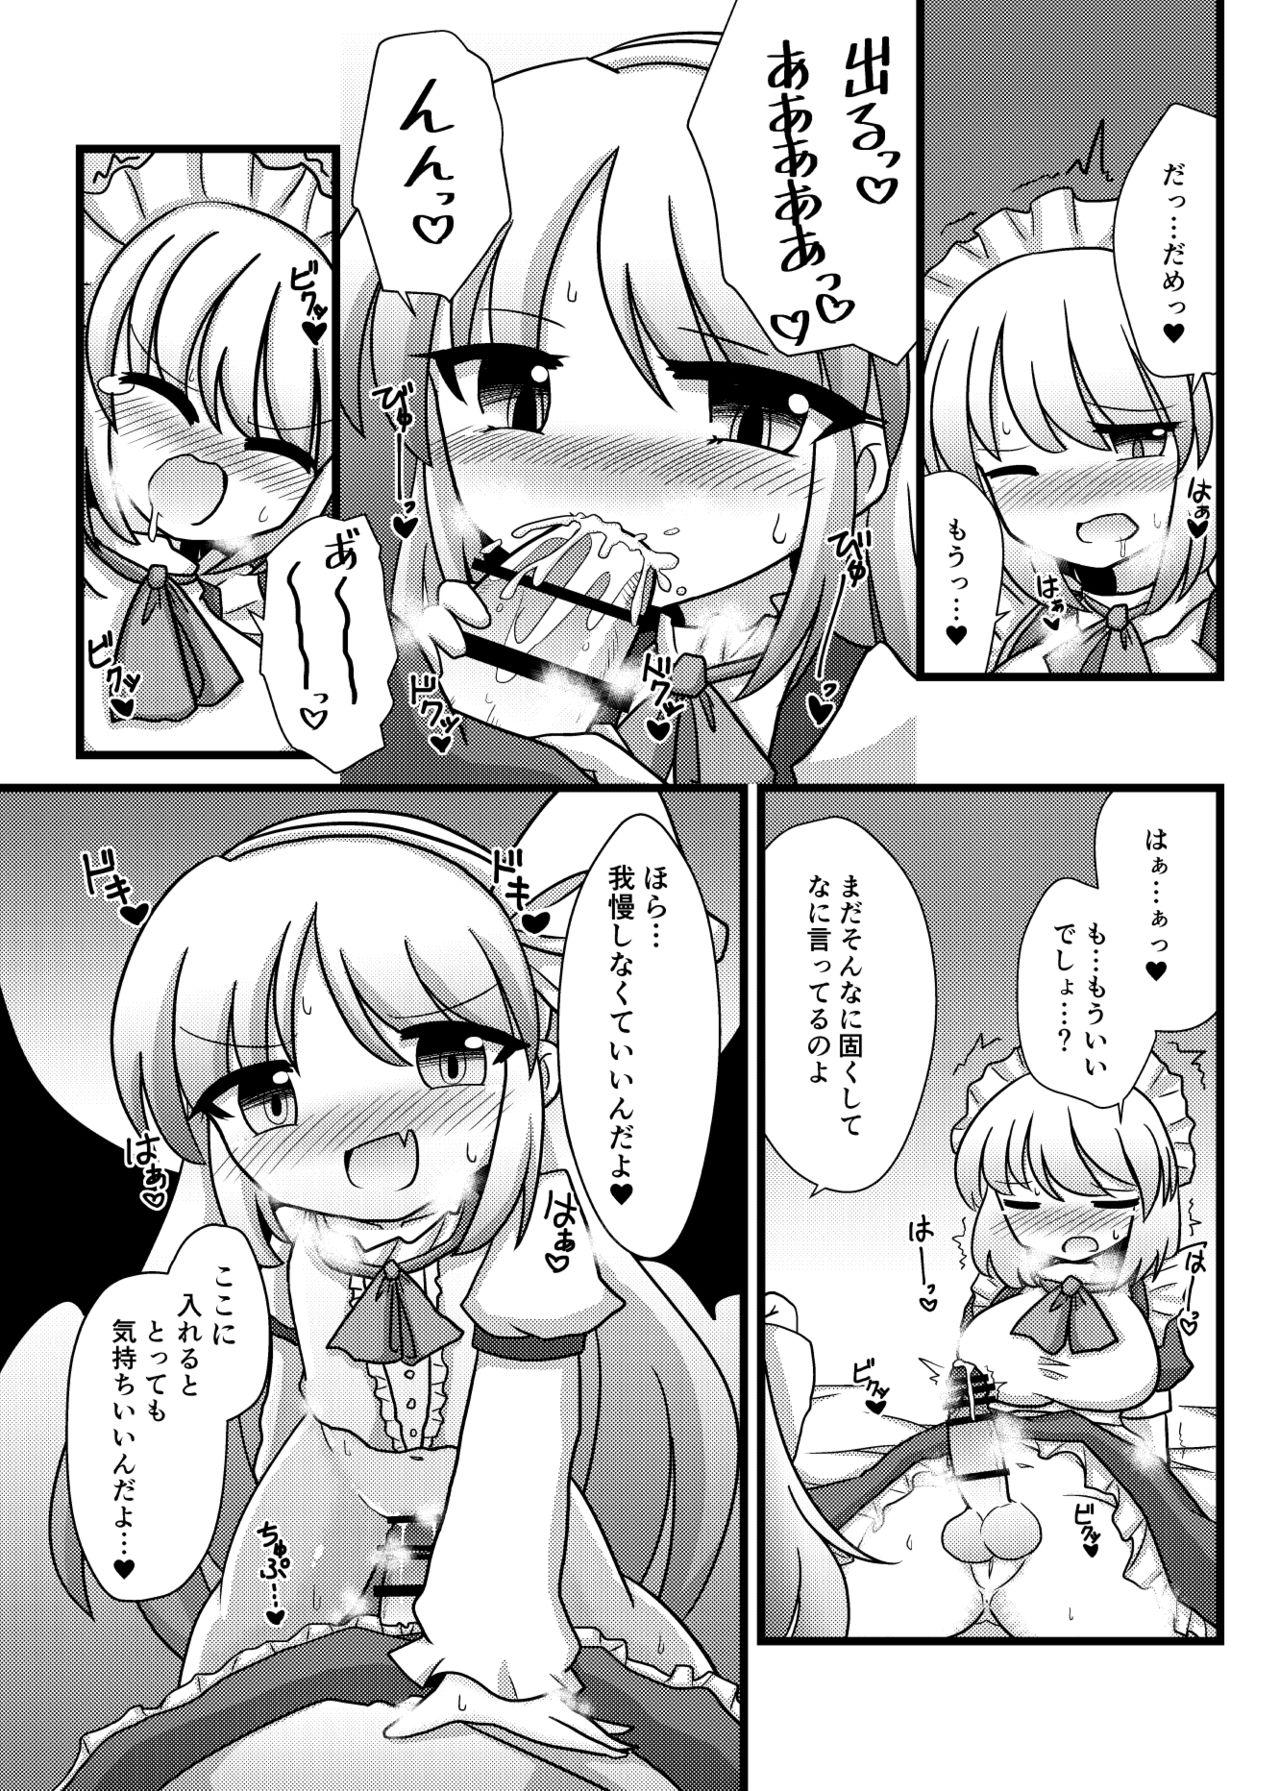 Women Sucking 旧作エロ合同に寄稿した漫画 - Touhou project Sexcams - Page 3